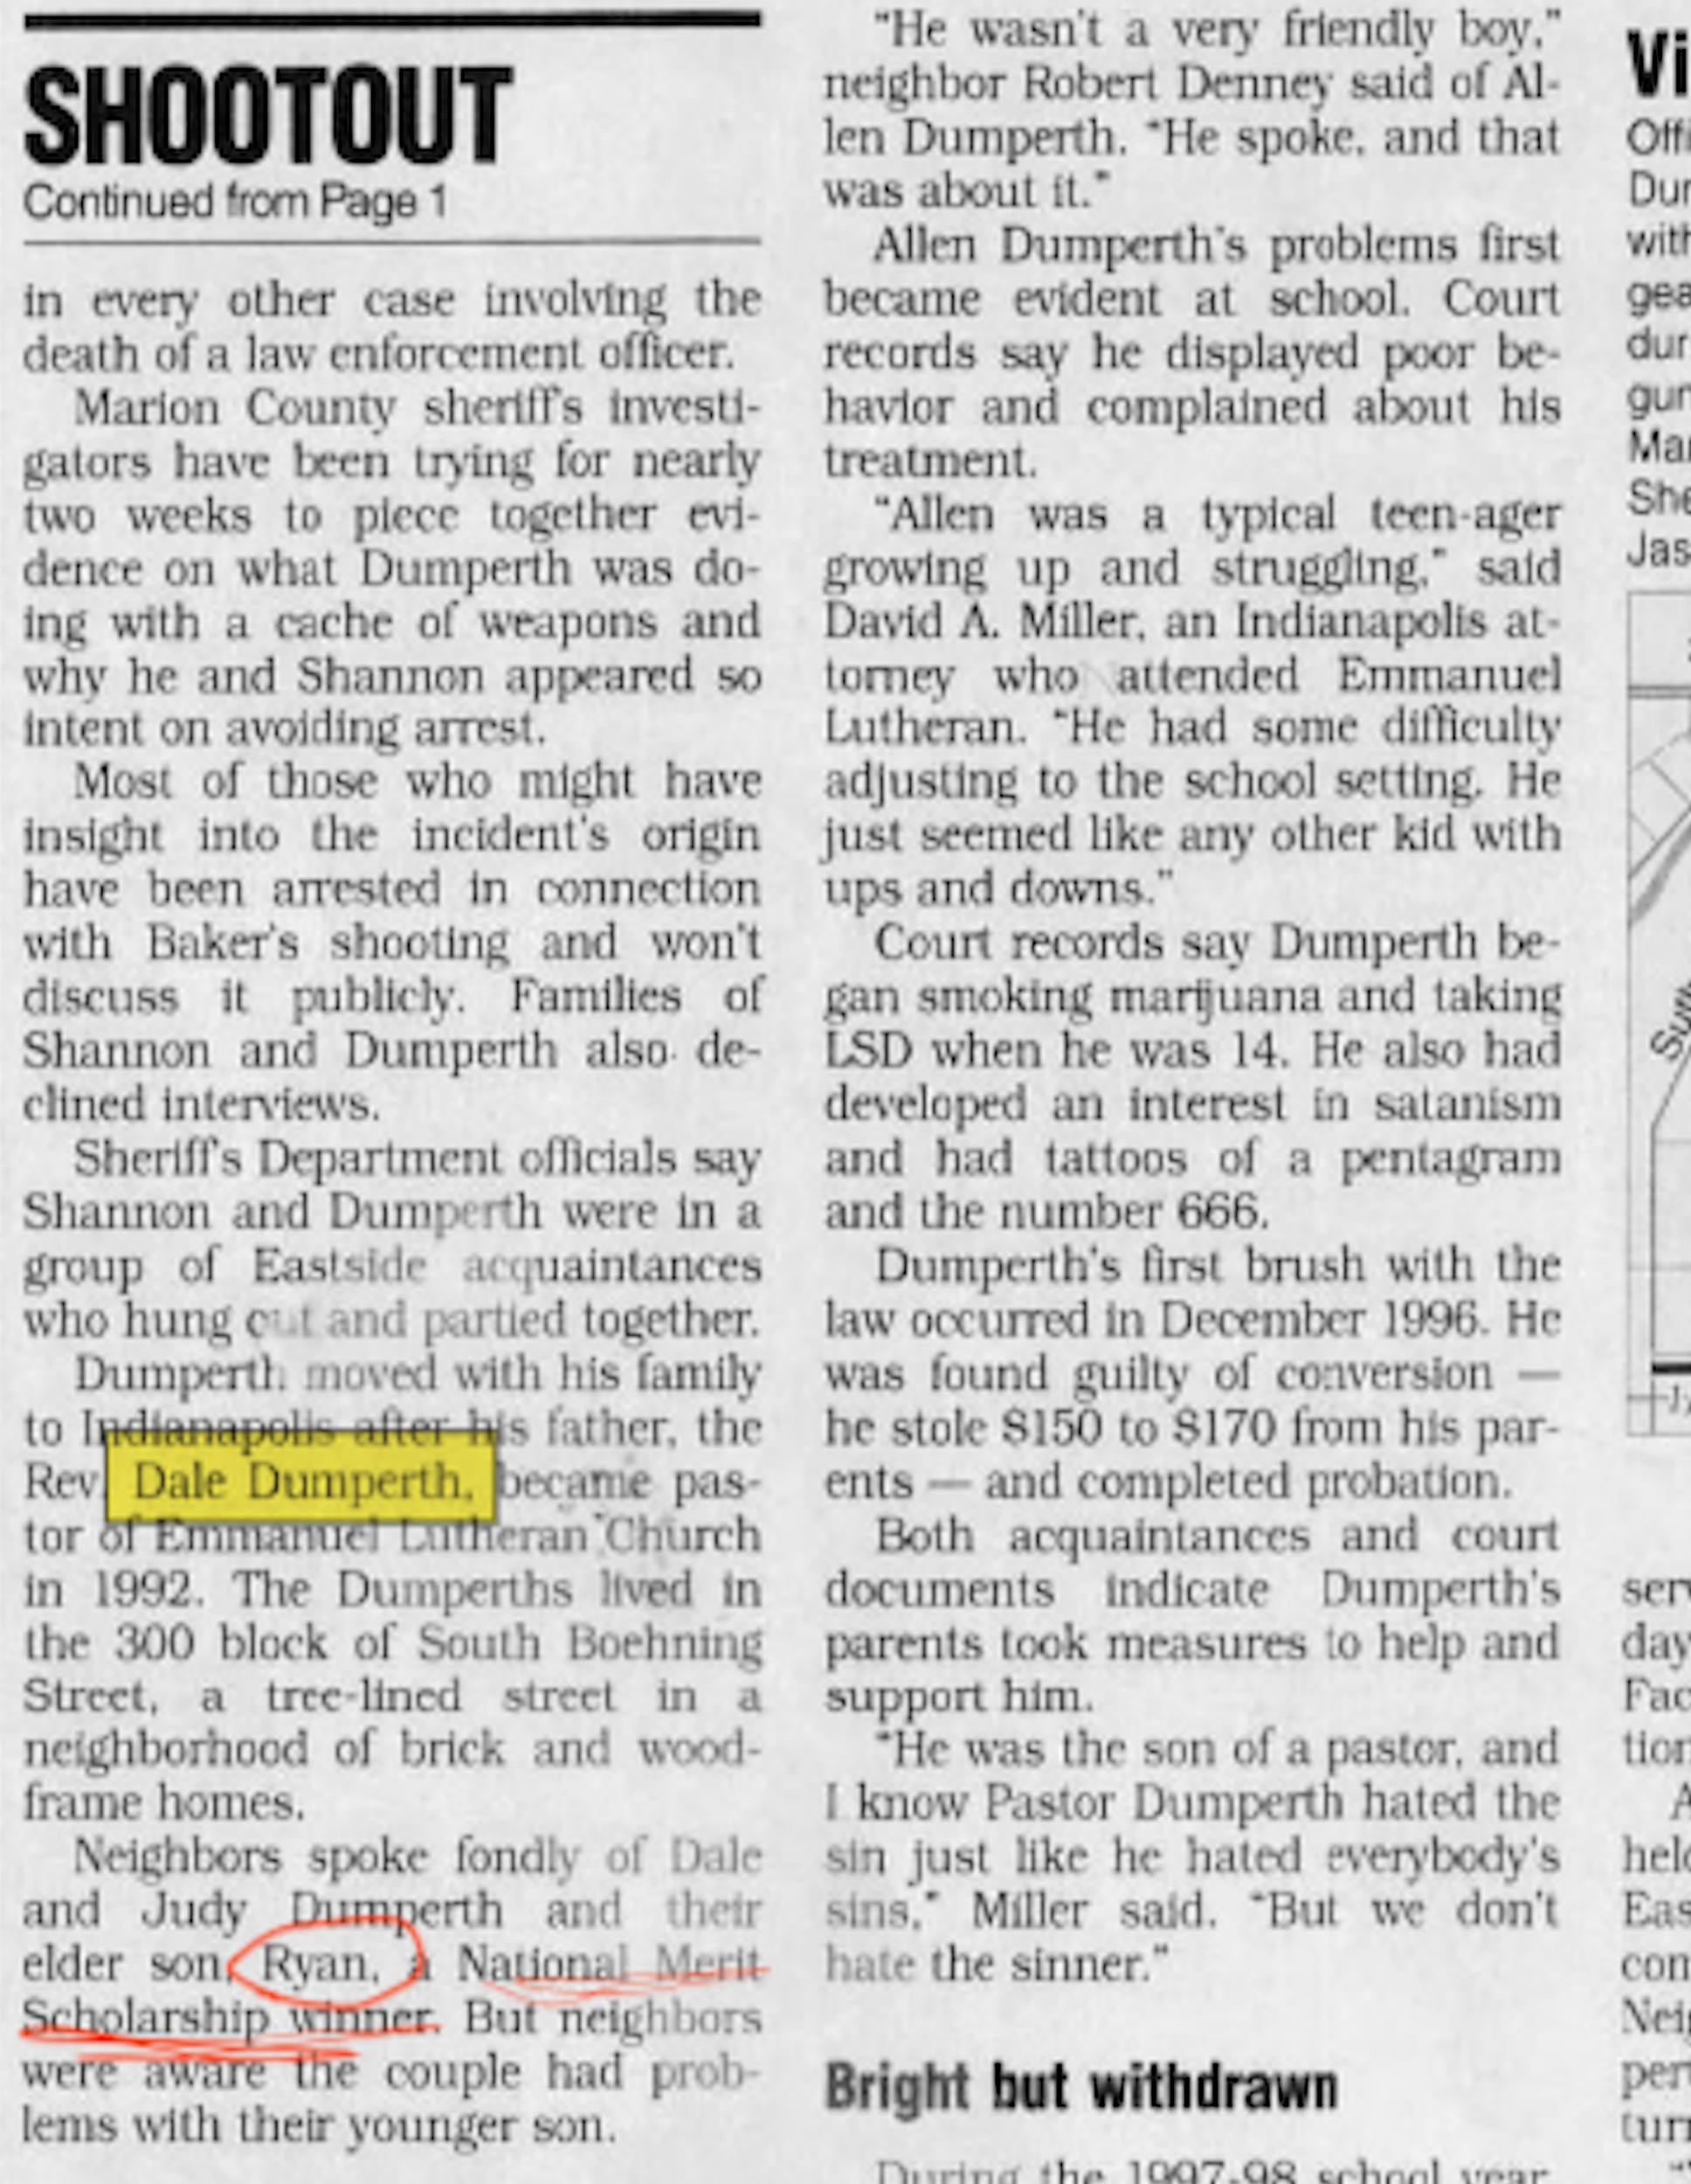 Screenshot of Indianapolis Star Oct. 2001 article about Allen Dumperth’s death, citing Dale and Ryan as father and brother, mentioning Ryan’s grades in contrast to Allen’s troubles.